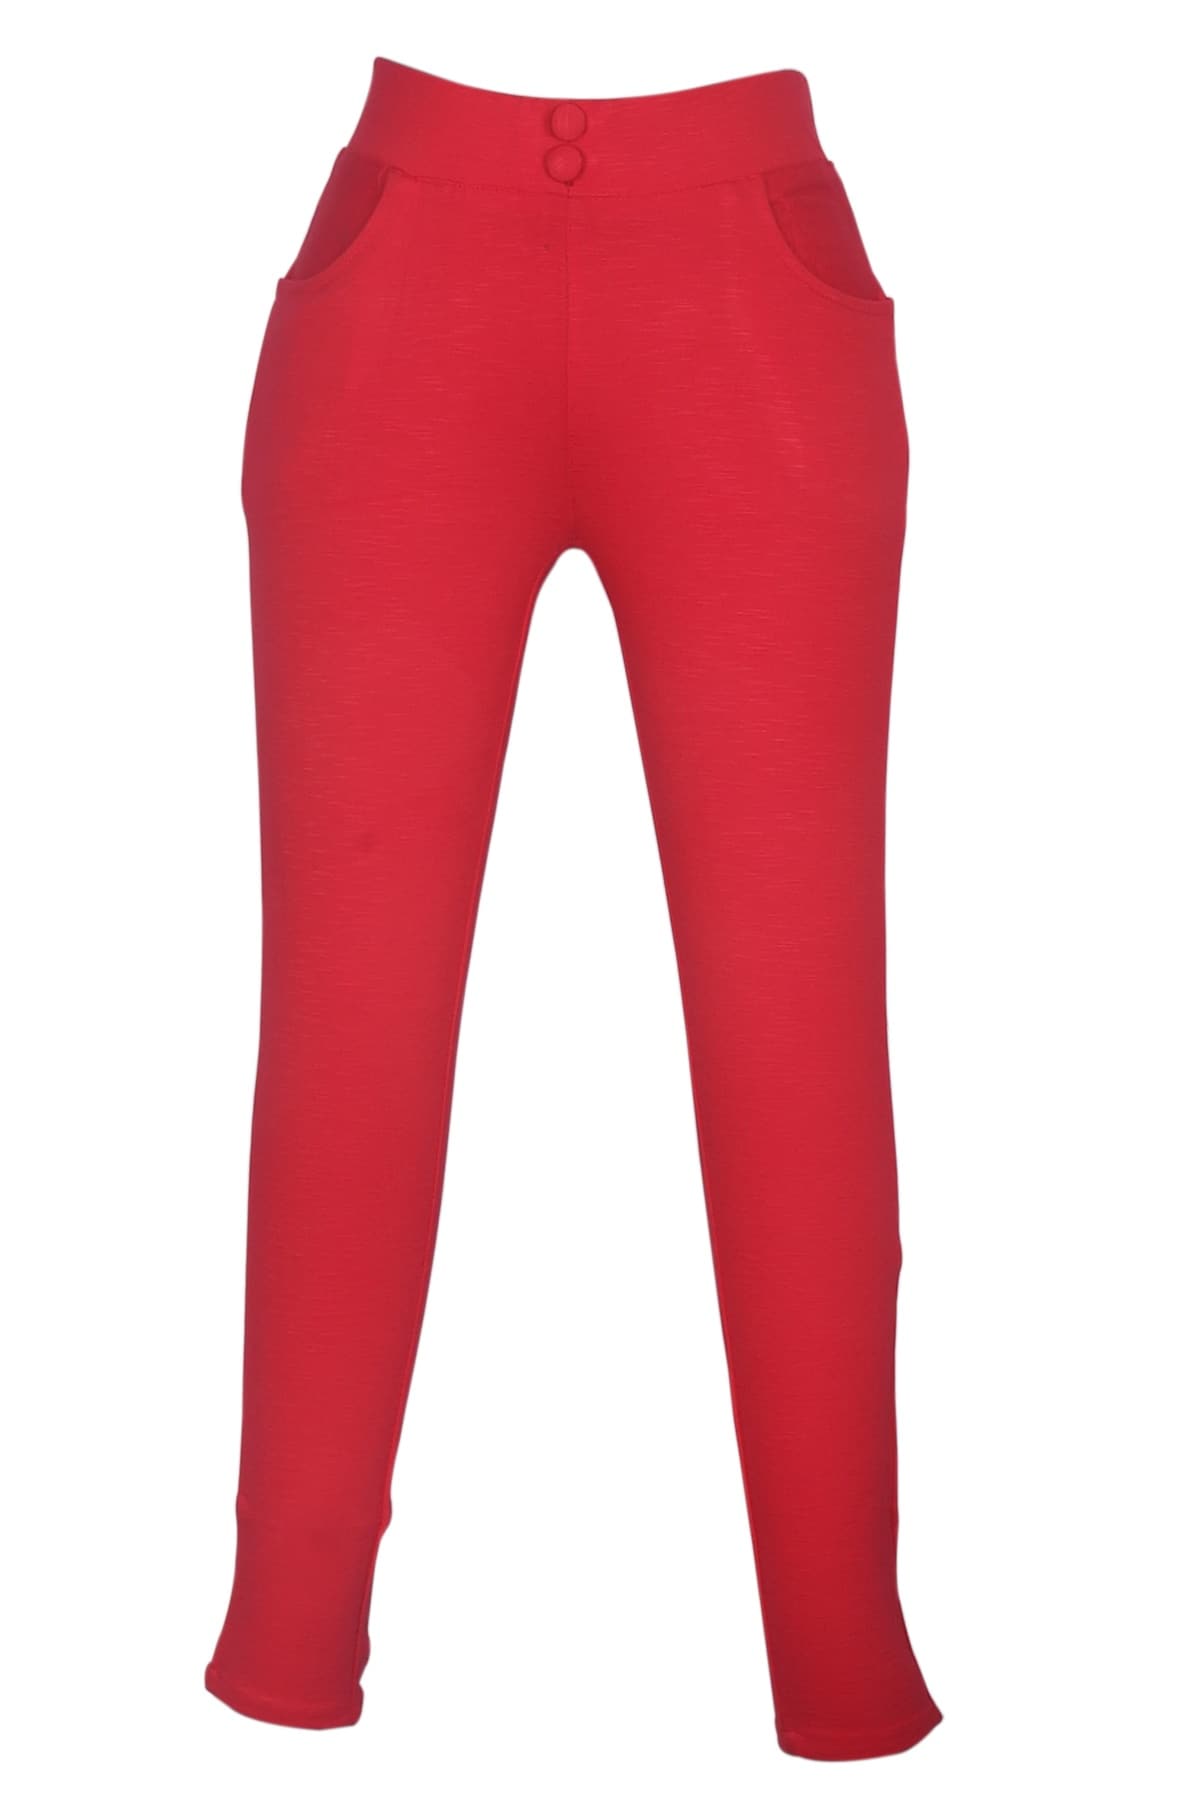 Red Mid Waist Women Cotton Lycra Solid Colour Legging, Casual Wear